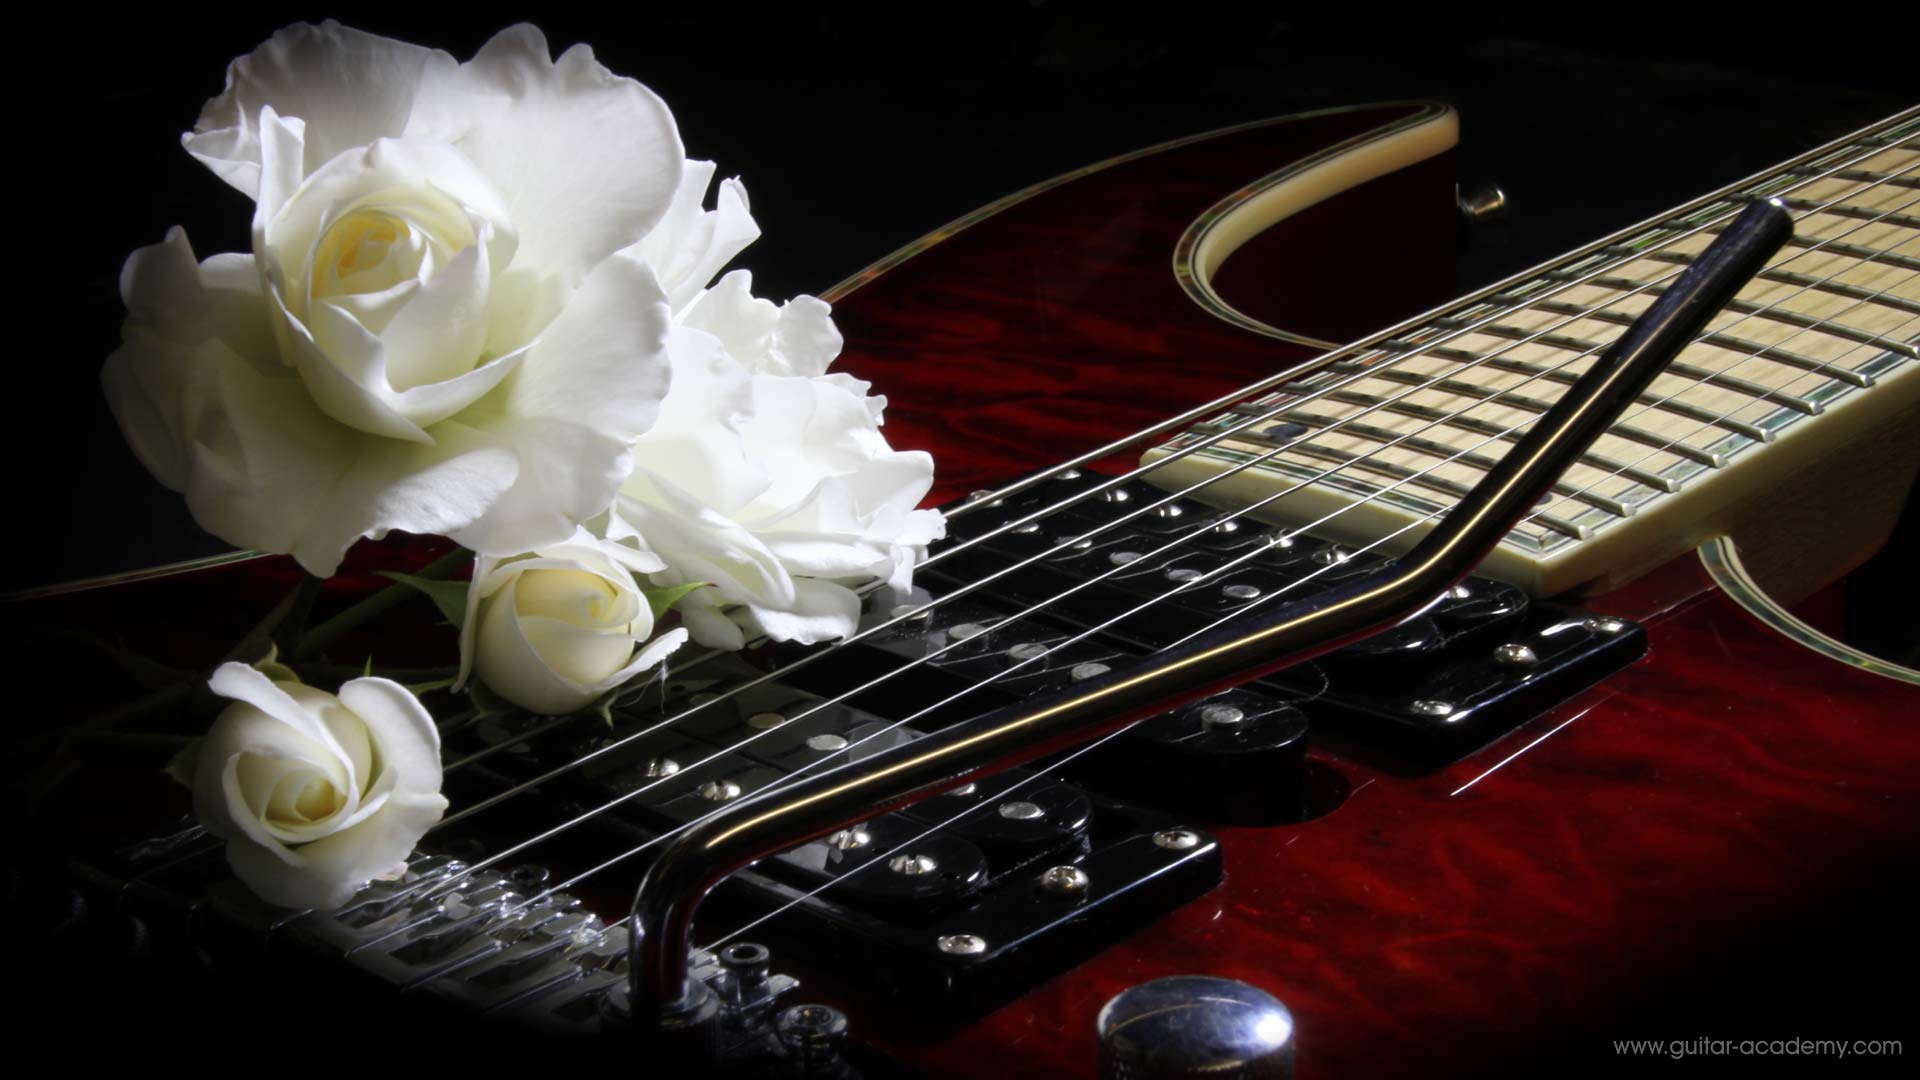 7 string electric guitar with rose